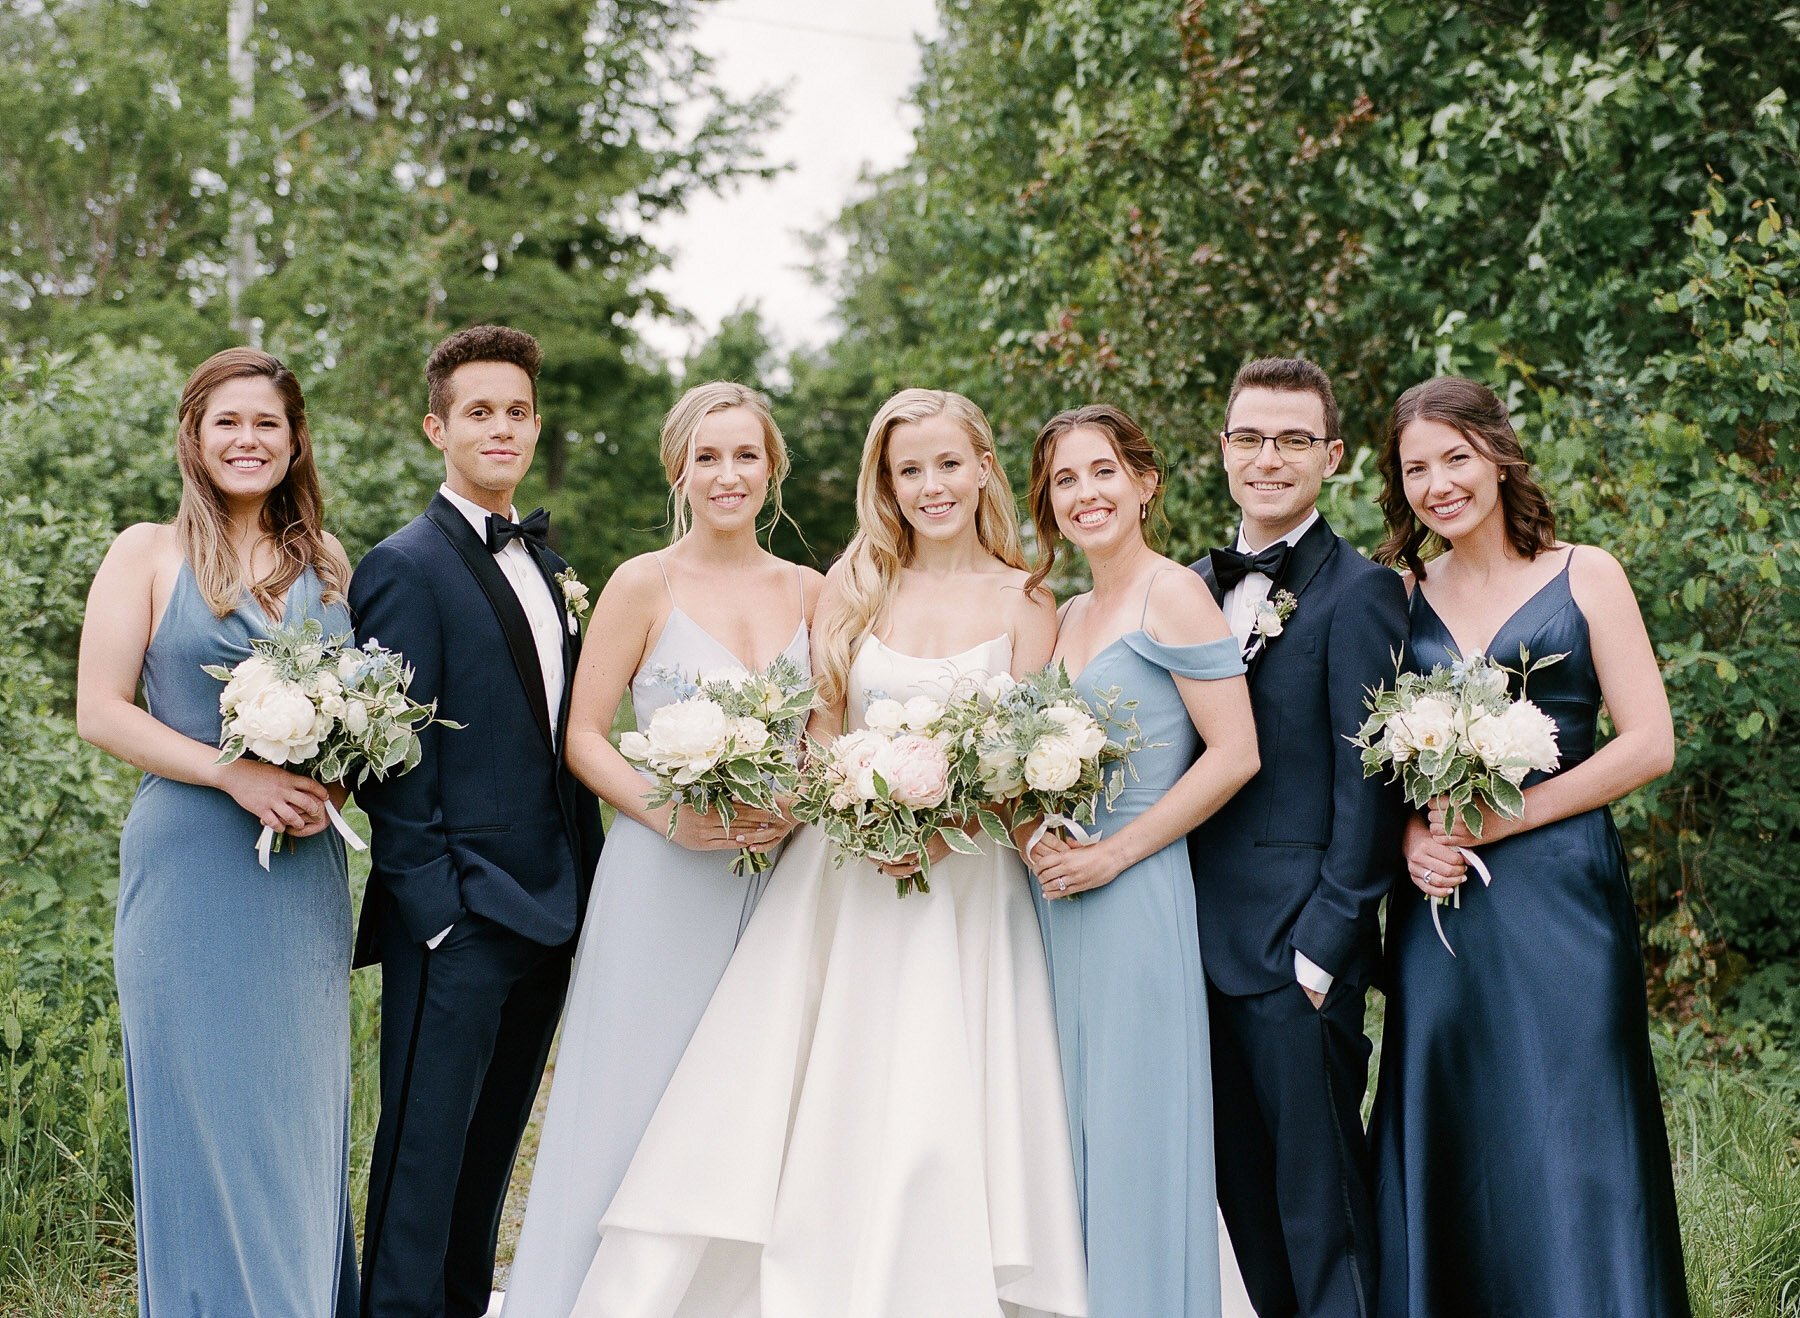 Chautauqua Institution Wedding in New York with EVL Events and Heirloom Soul Floral Design and Jenny Yoo bridesmaids